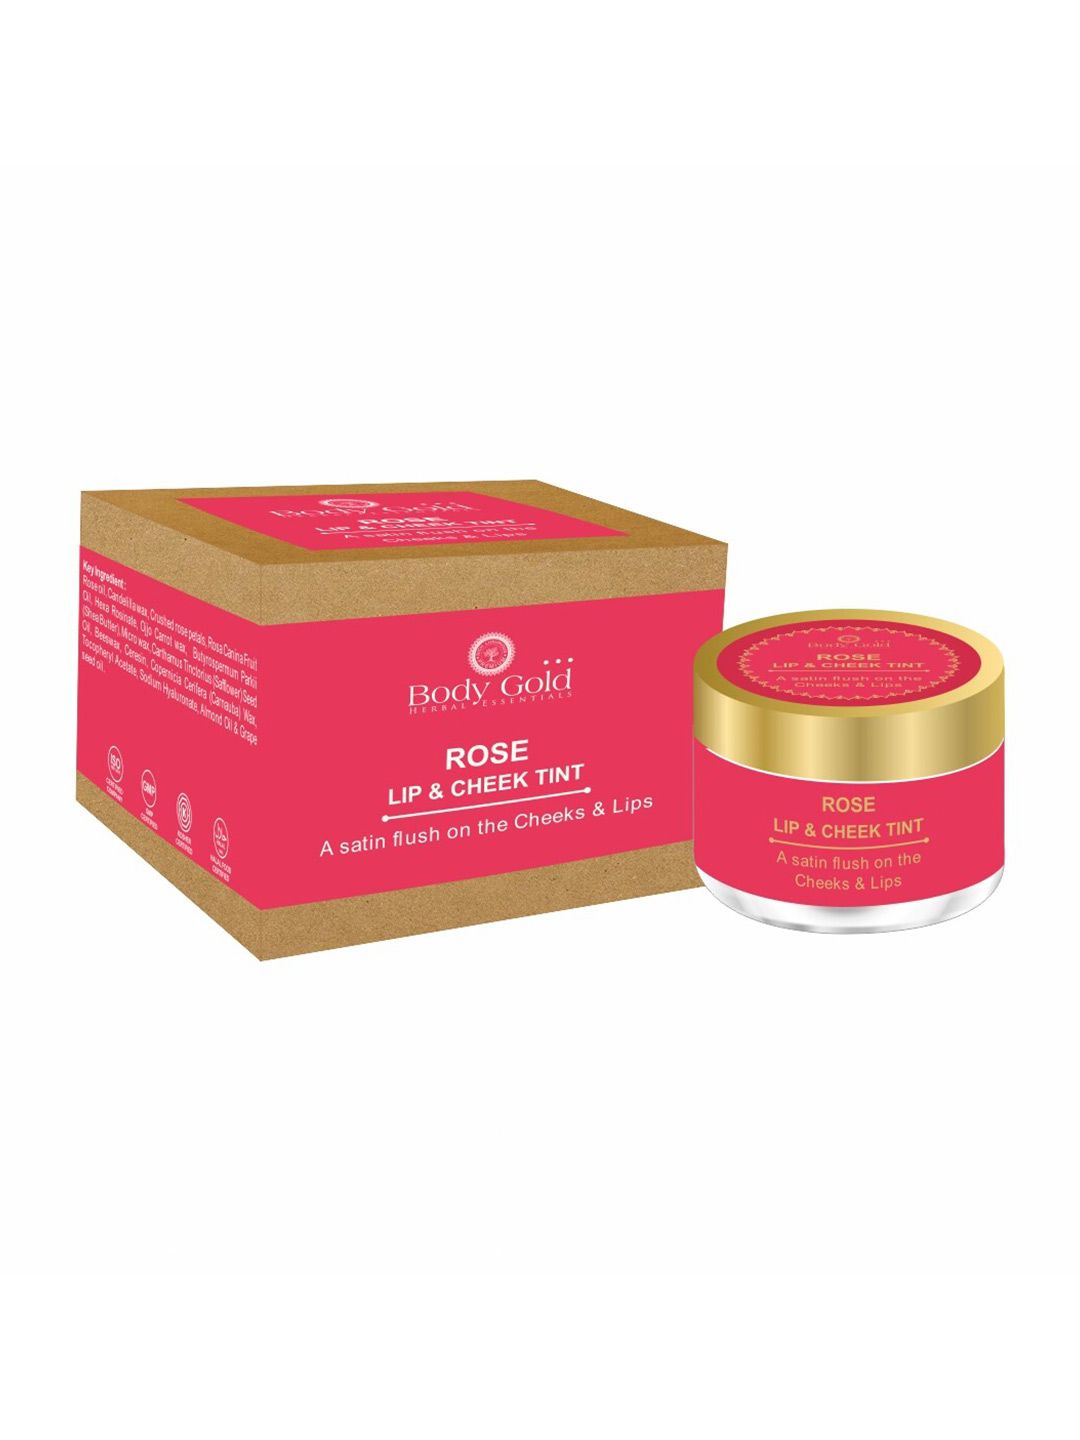 Body Gold Unisex Red Rose Lip & Cheek Tint Price in India